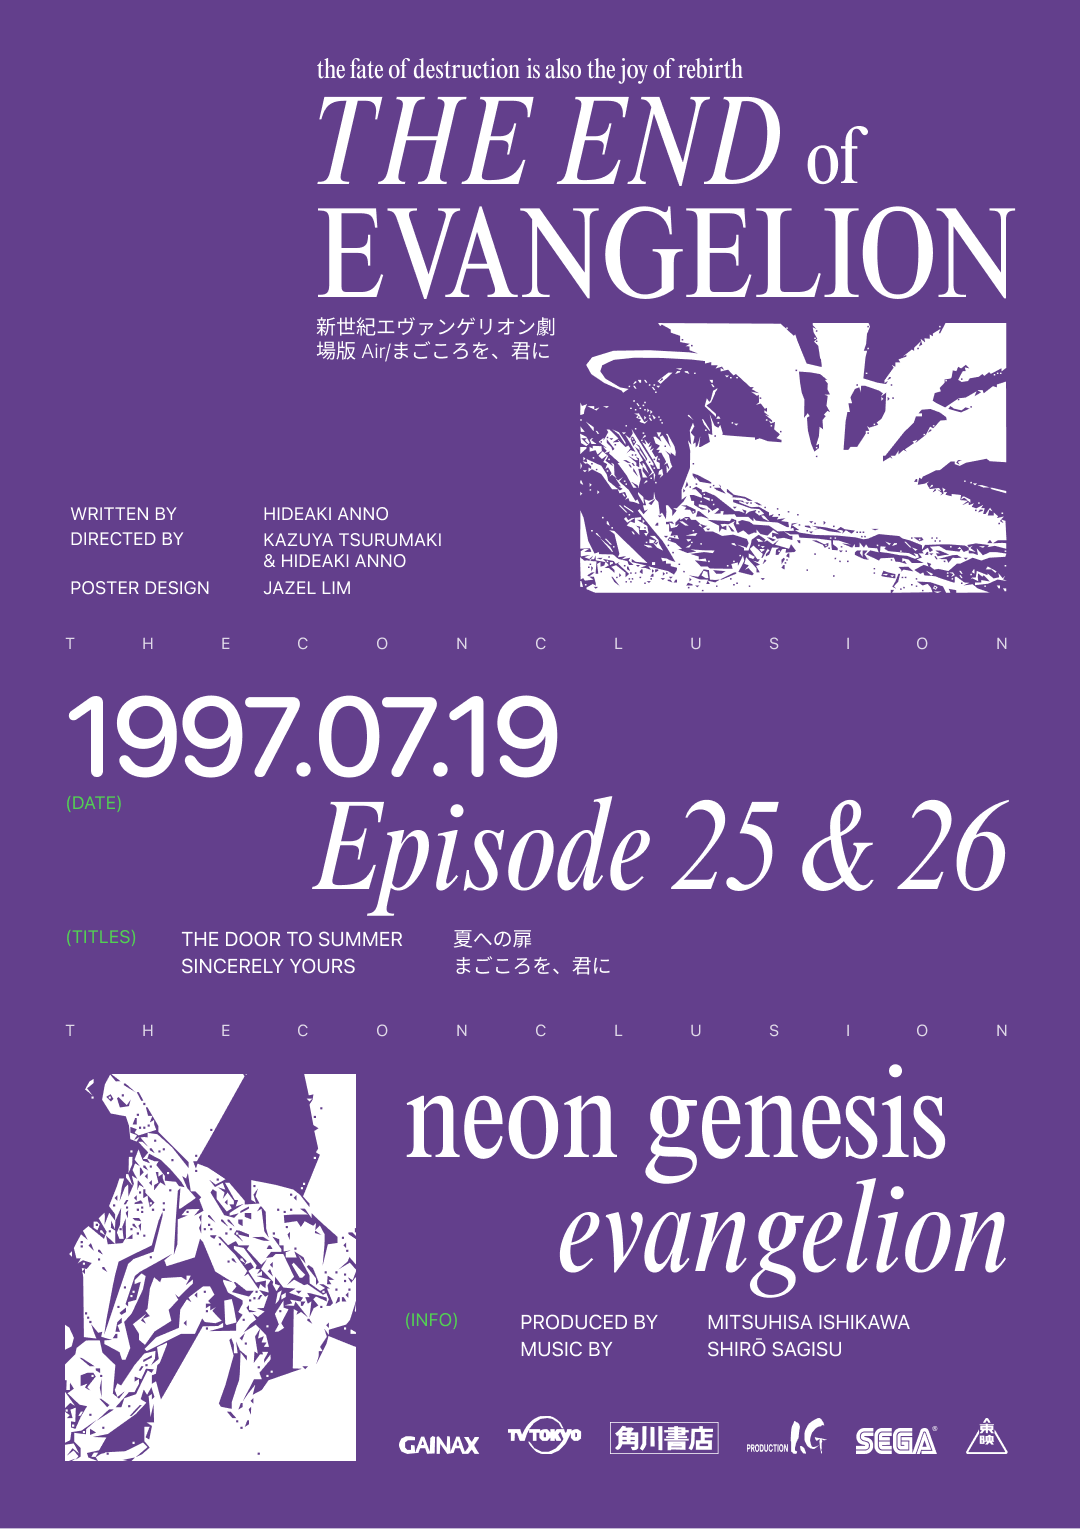 A poster that says, 'the fate of destruction is also the joy of rebirth, The End of Evangelion' as the title. Then, written by Hideaki Anno, Directed by Kazuya Tsurumaki and Hideaki Anno, Poster design Jazel Lim. Followed by, 1997 July 19, Episode 25 and 26, Titled The door to summer and Sincerly yours respectively. Neon Genesis Evangelion, Produced by Mitsuhisa Ishikawa and Music by Shiro Sagisu.